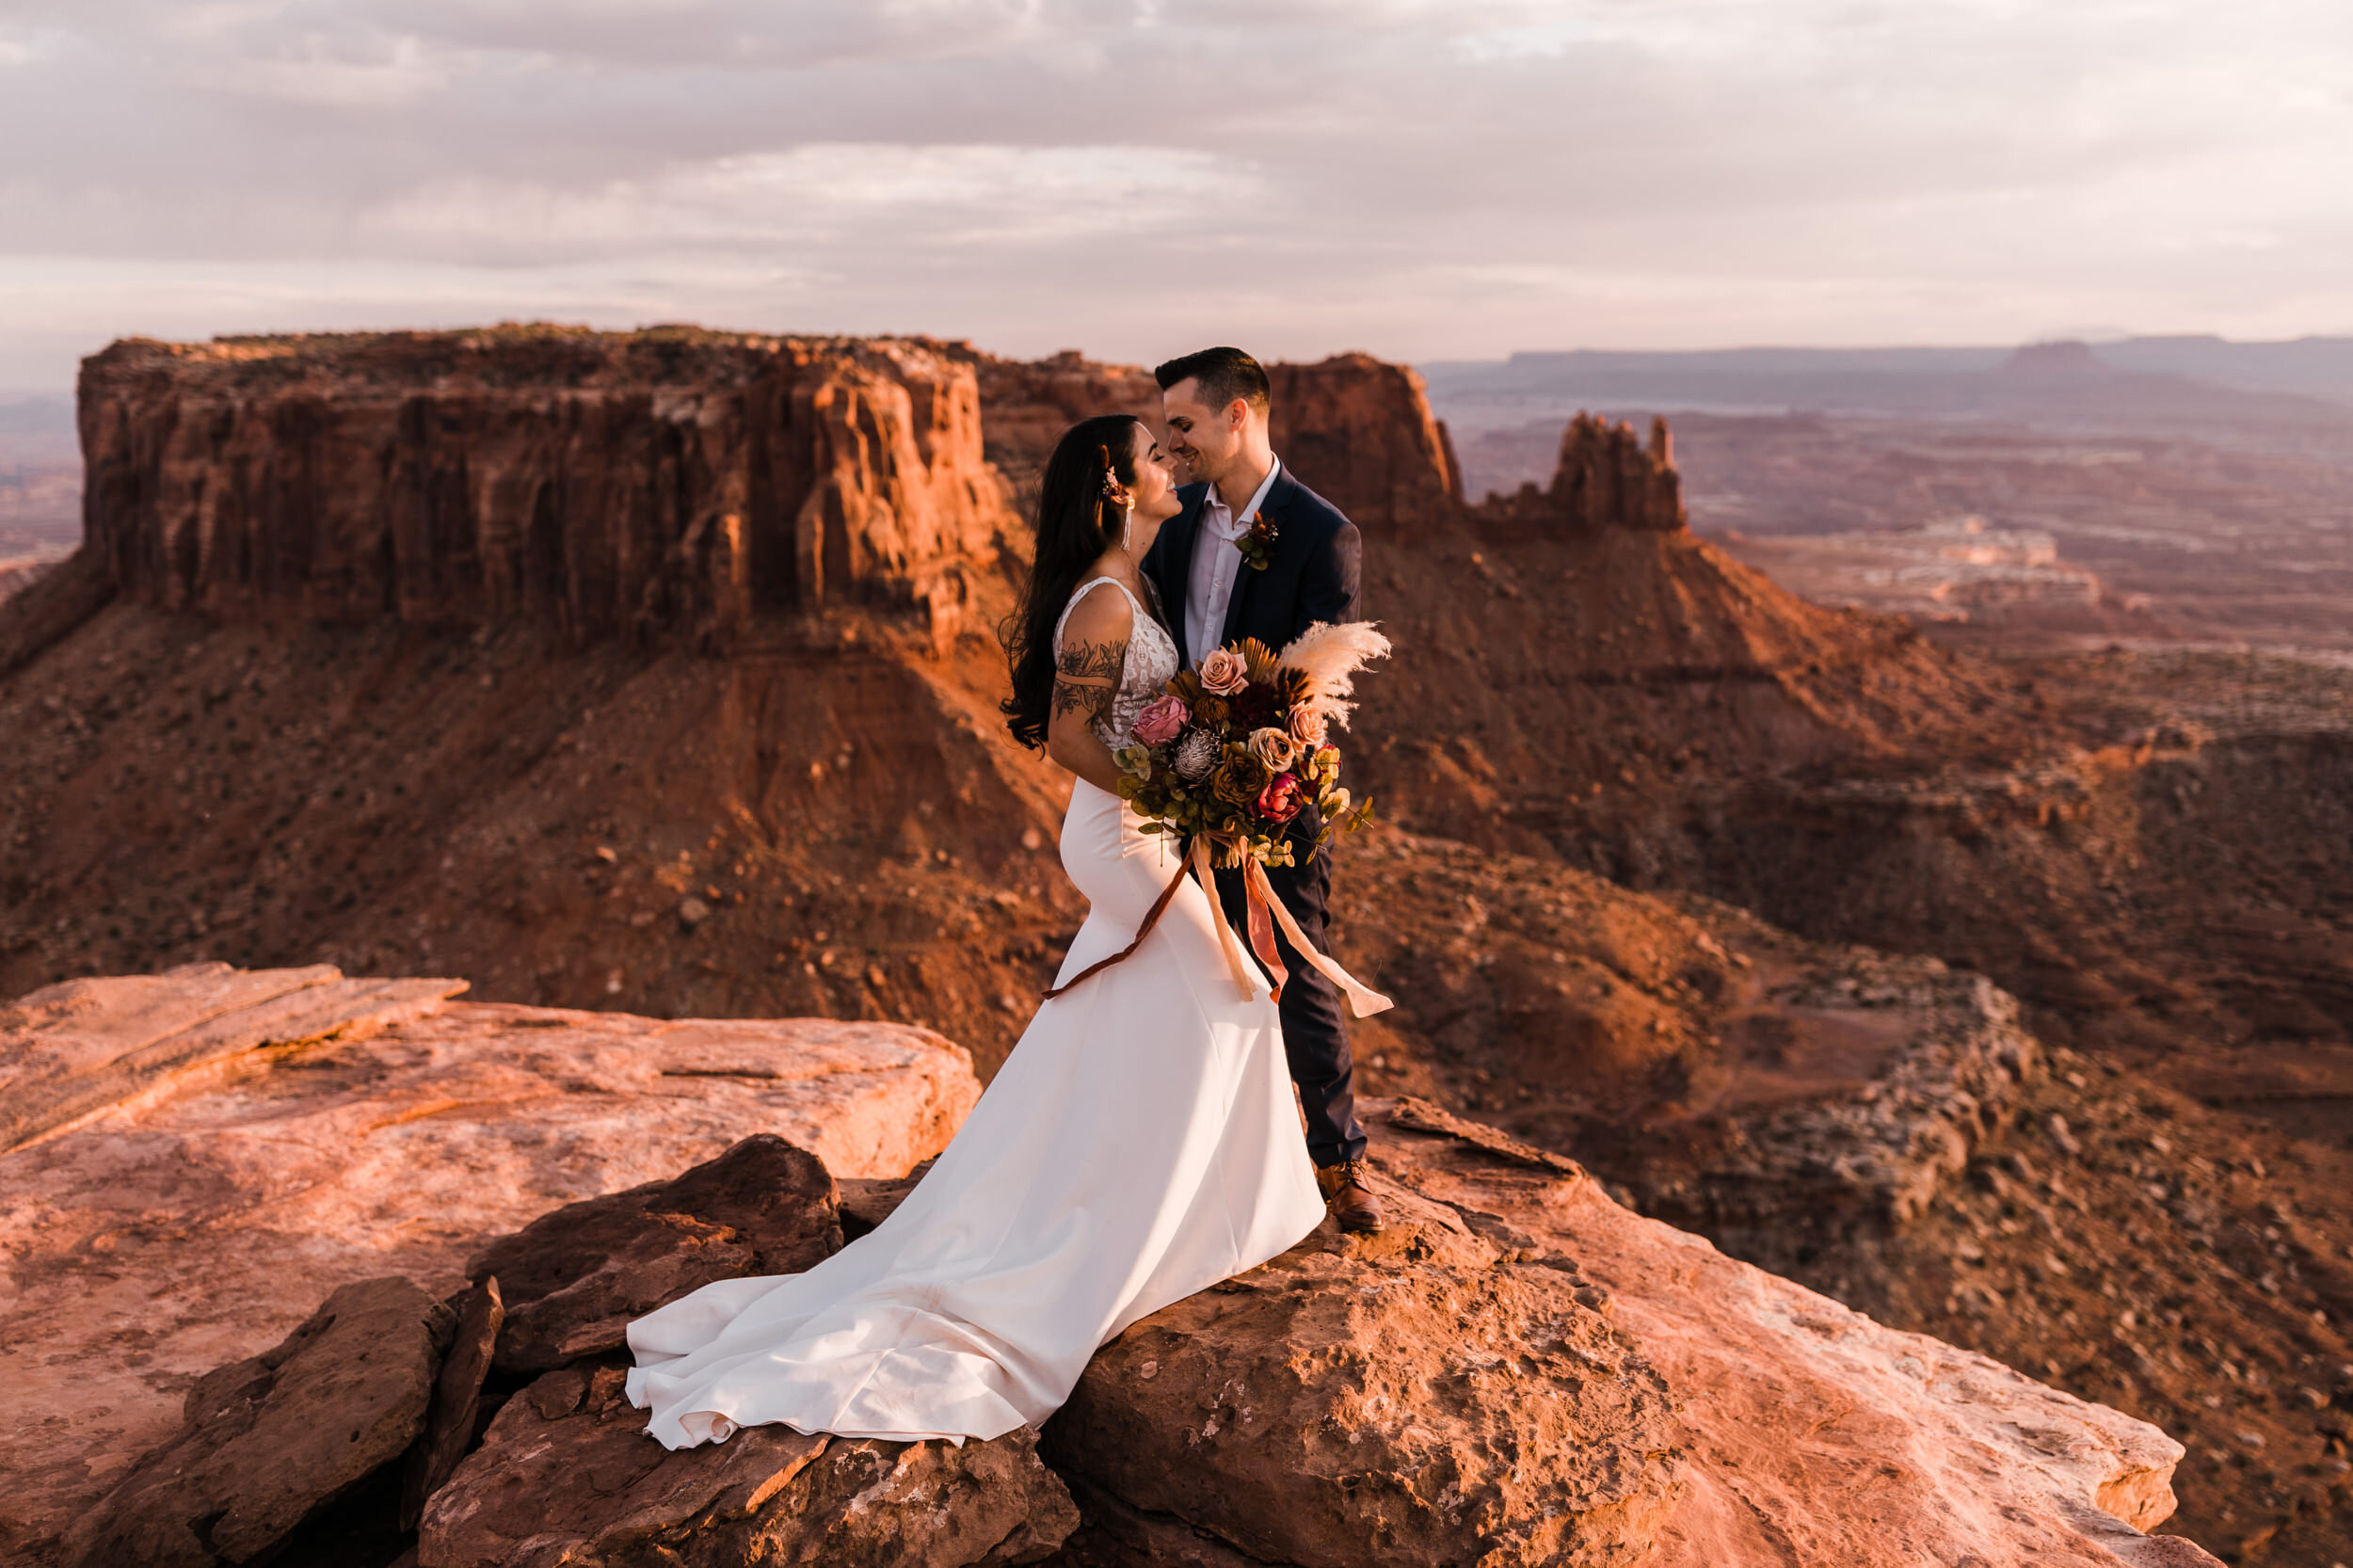 Canyonlands National Park Elopement | Best of 2020, Our Favorite Wedding Photos of the Year | The Hearnes Adventure Wedding Photography